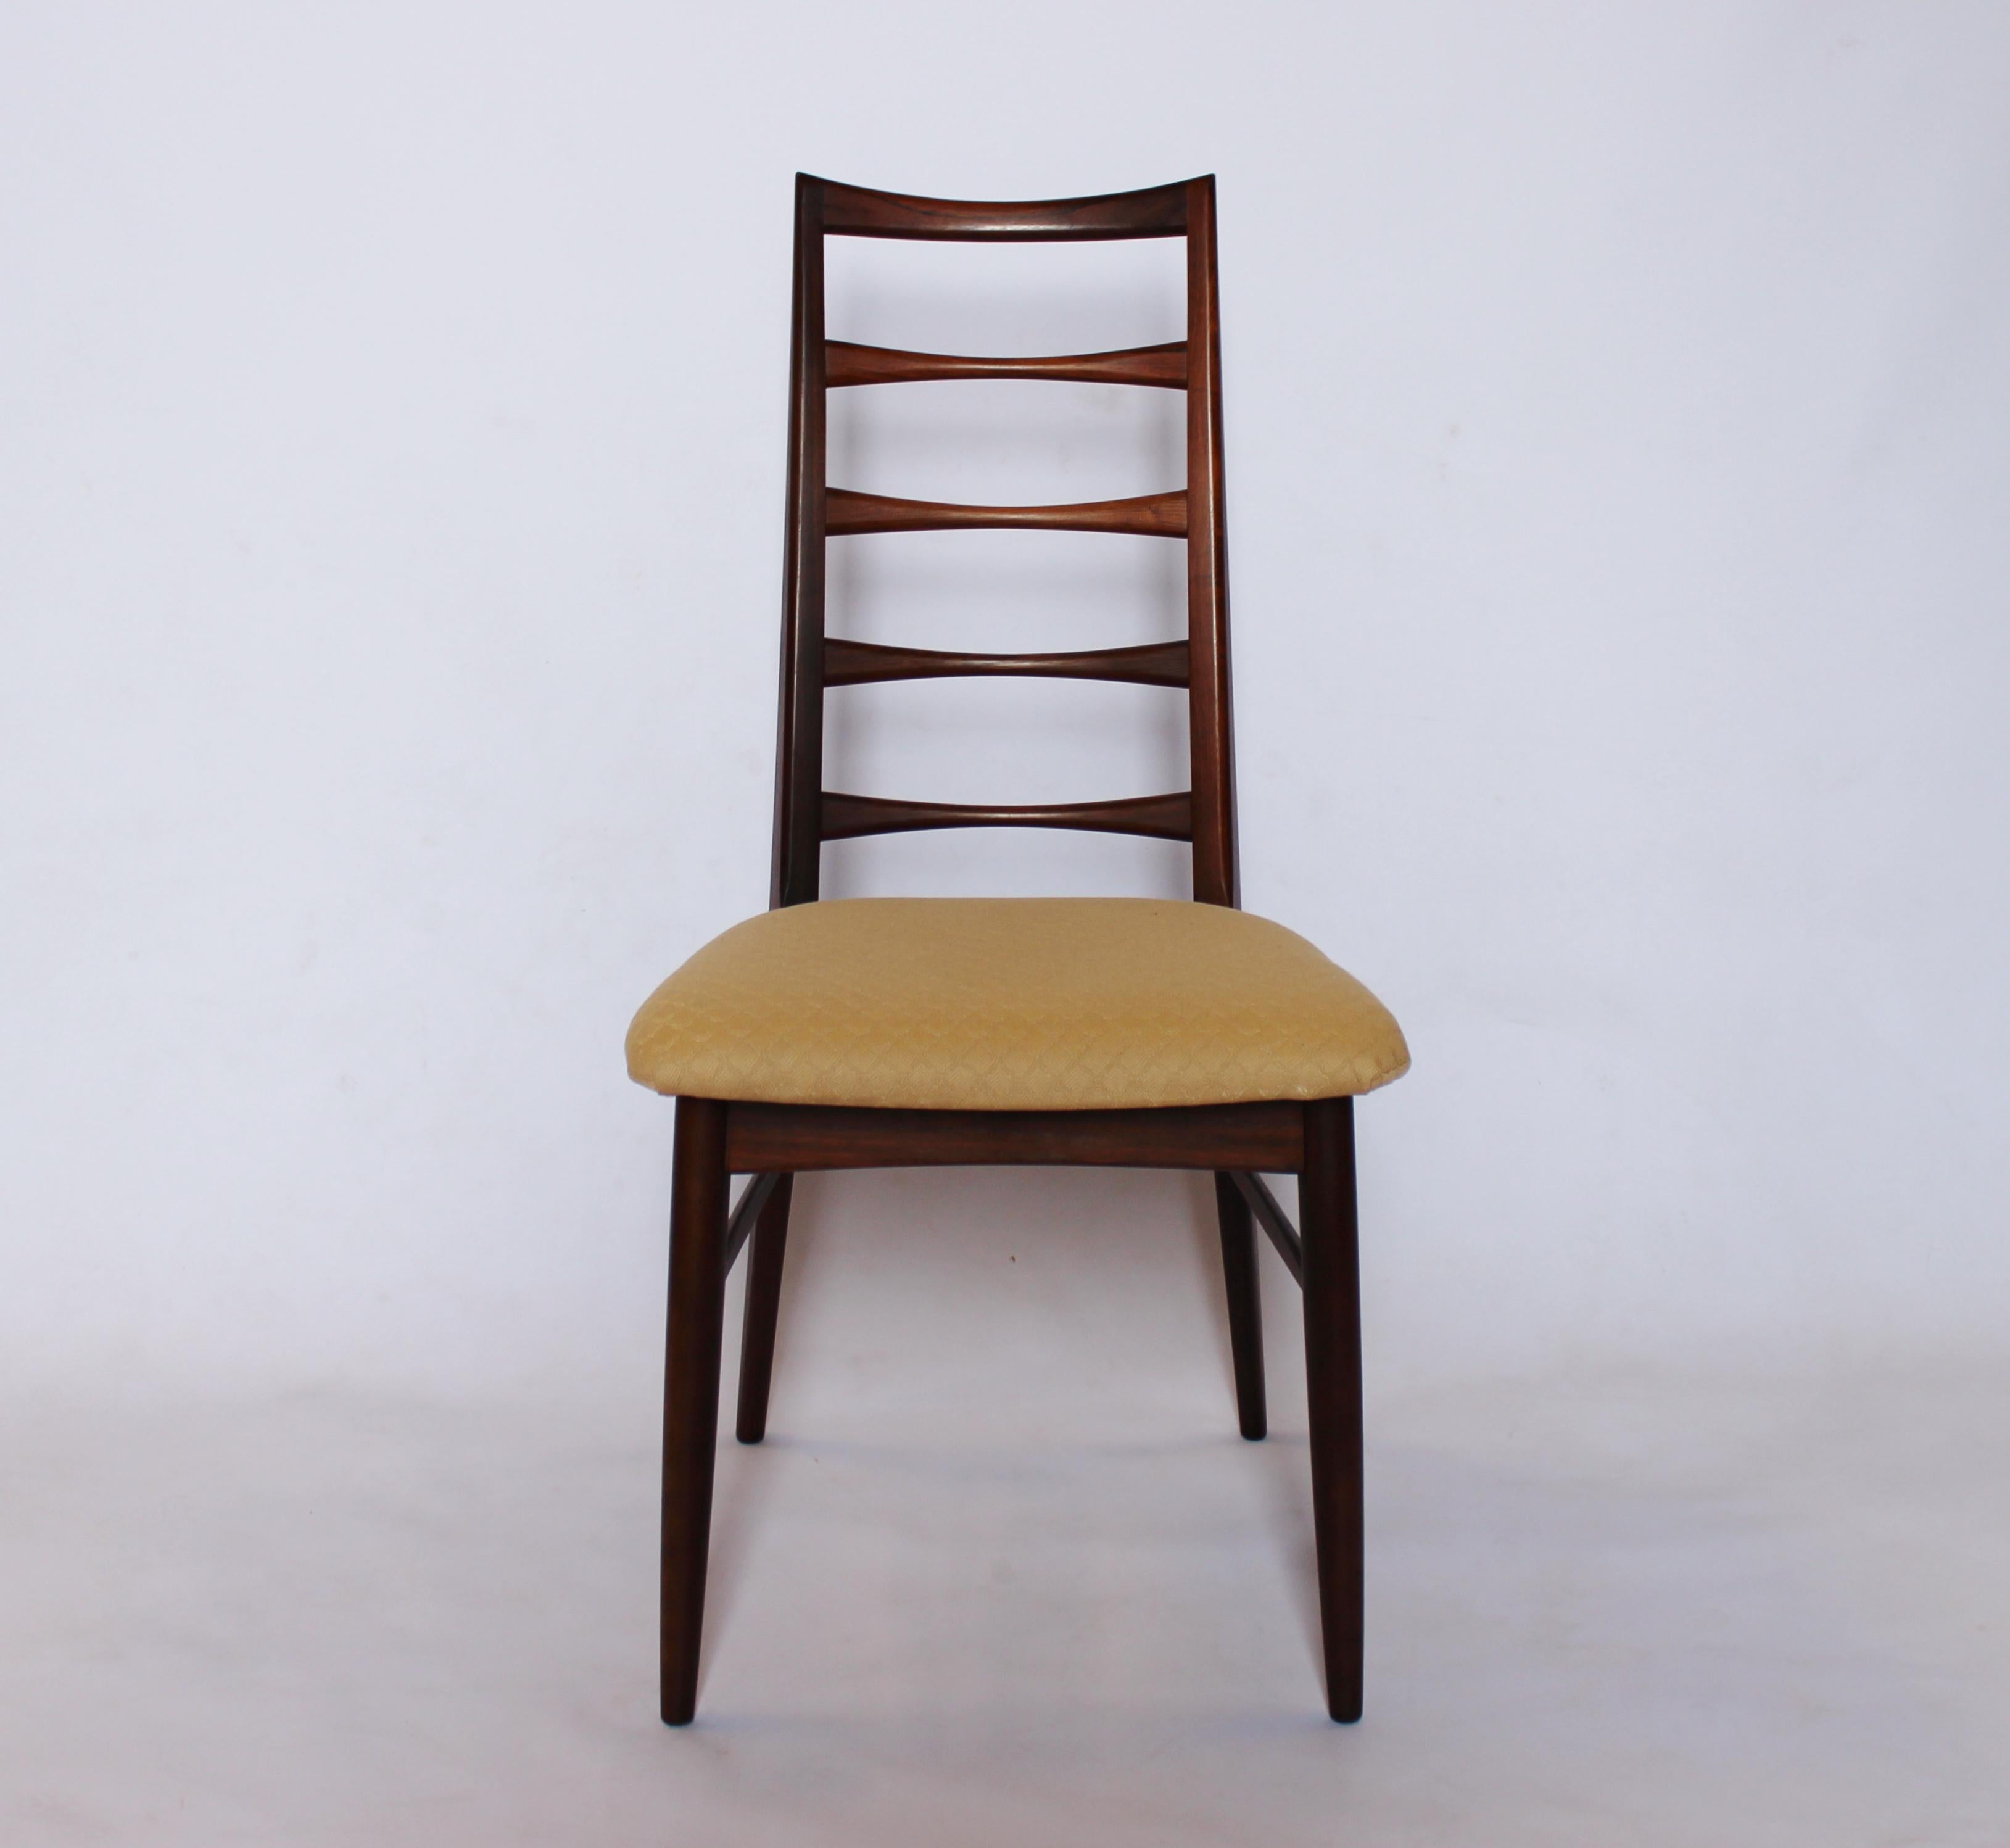 Set of eight dining room chairs, model Lis, in rosewood designed by Niels Koefoed in 1961 and manufactured by Koefoed furniture factory, Hornslet in the 1960s. The chairs are in great vintage condition.